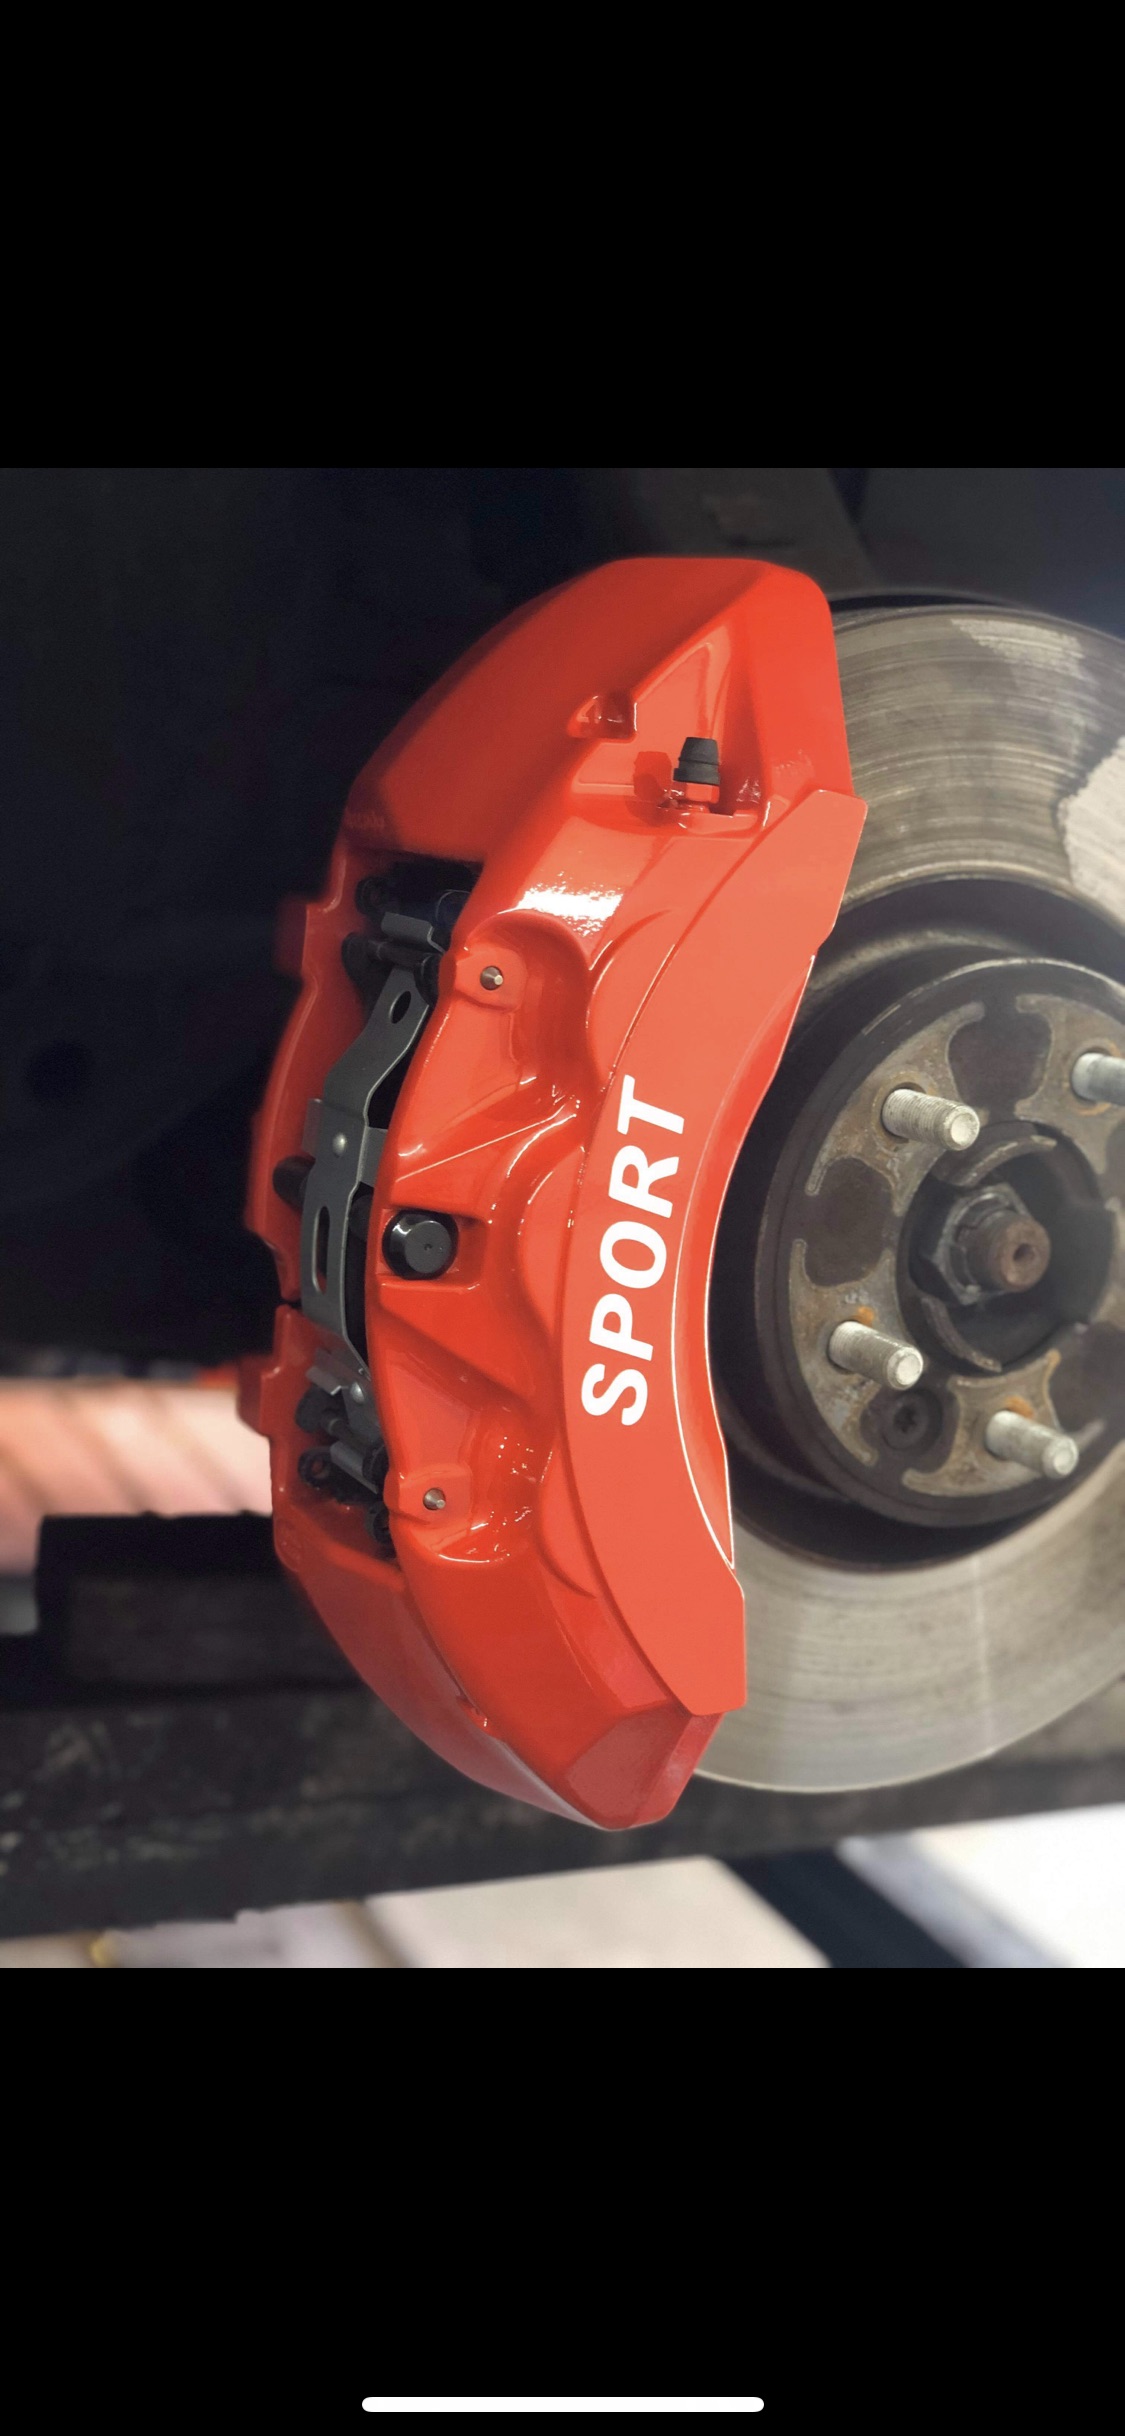 Range Rover Calipers Painted Red